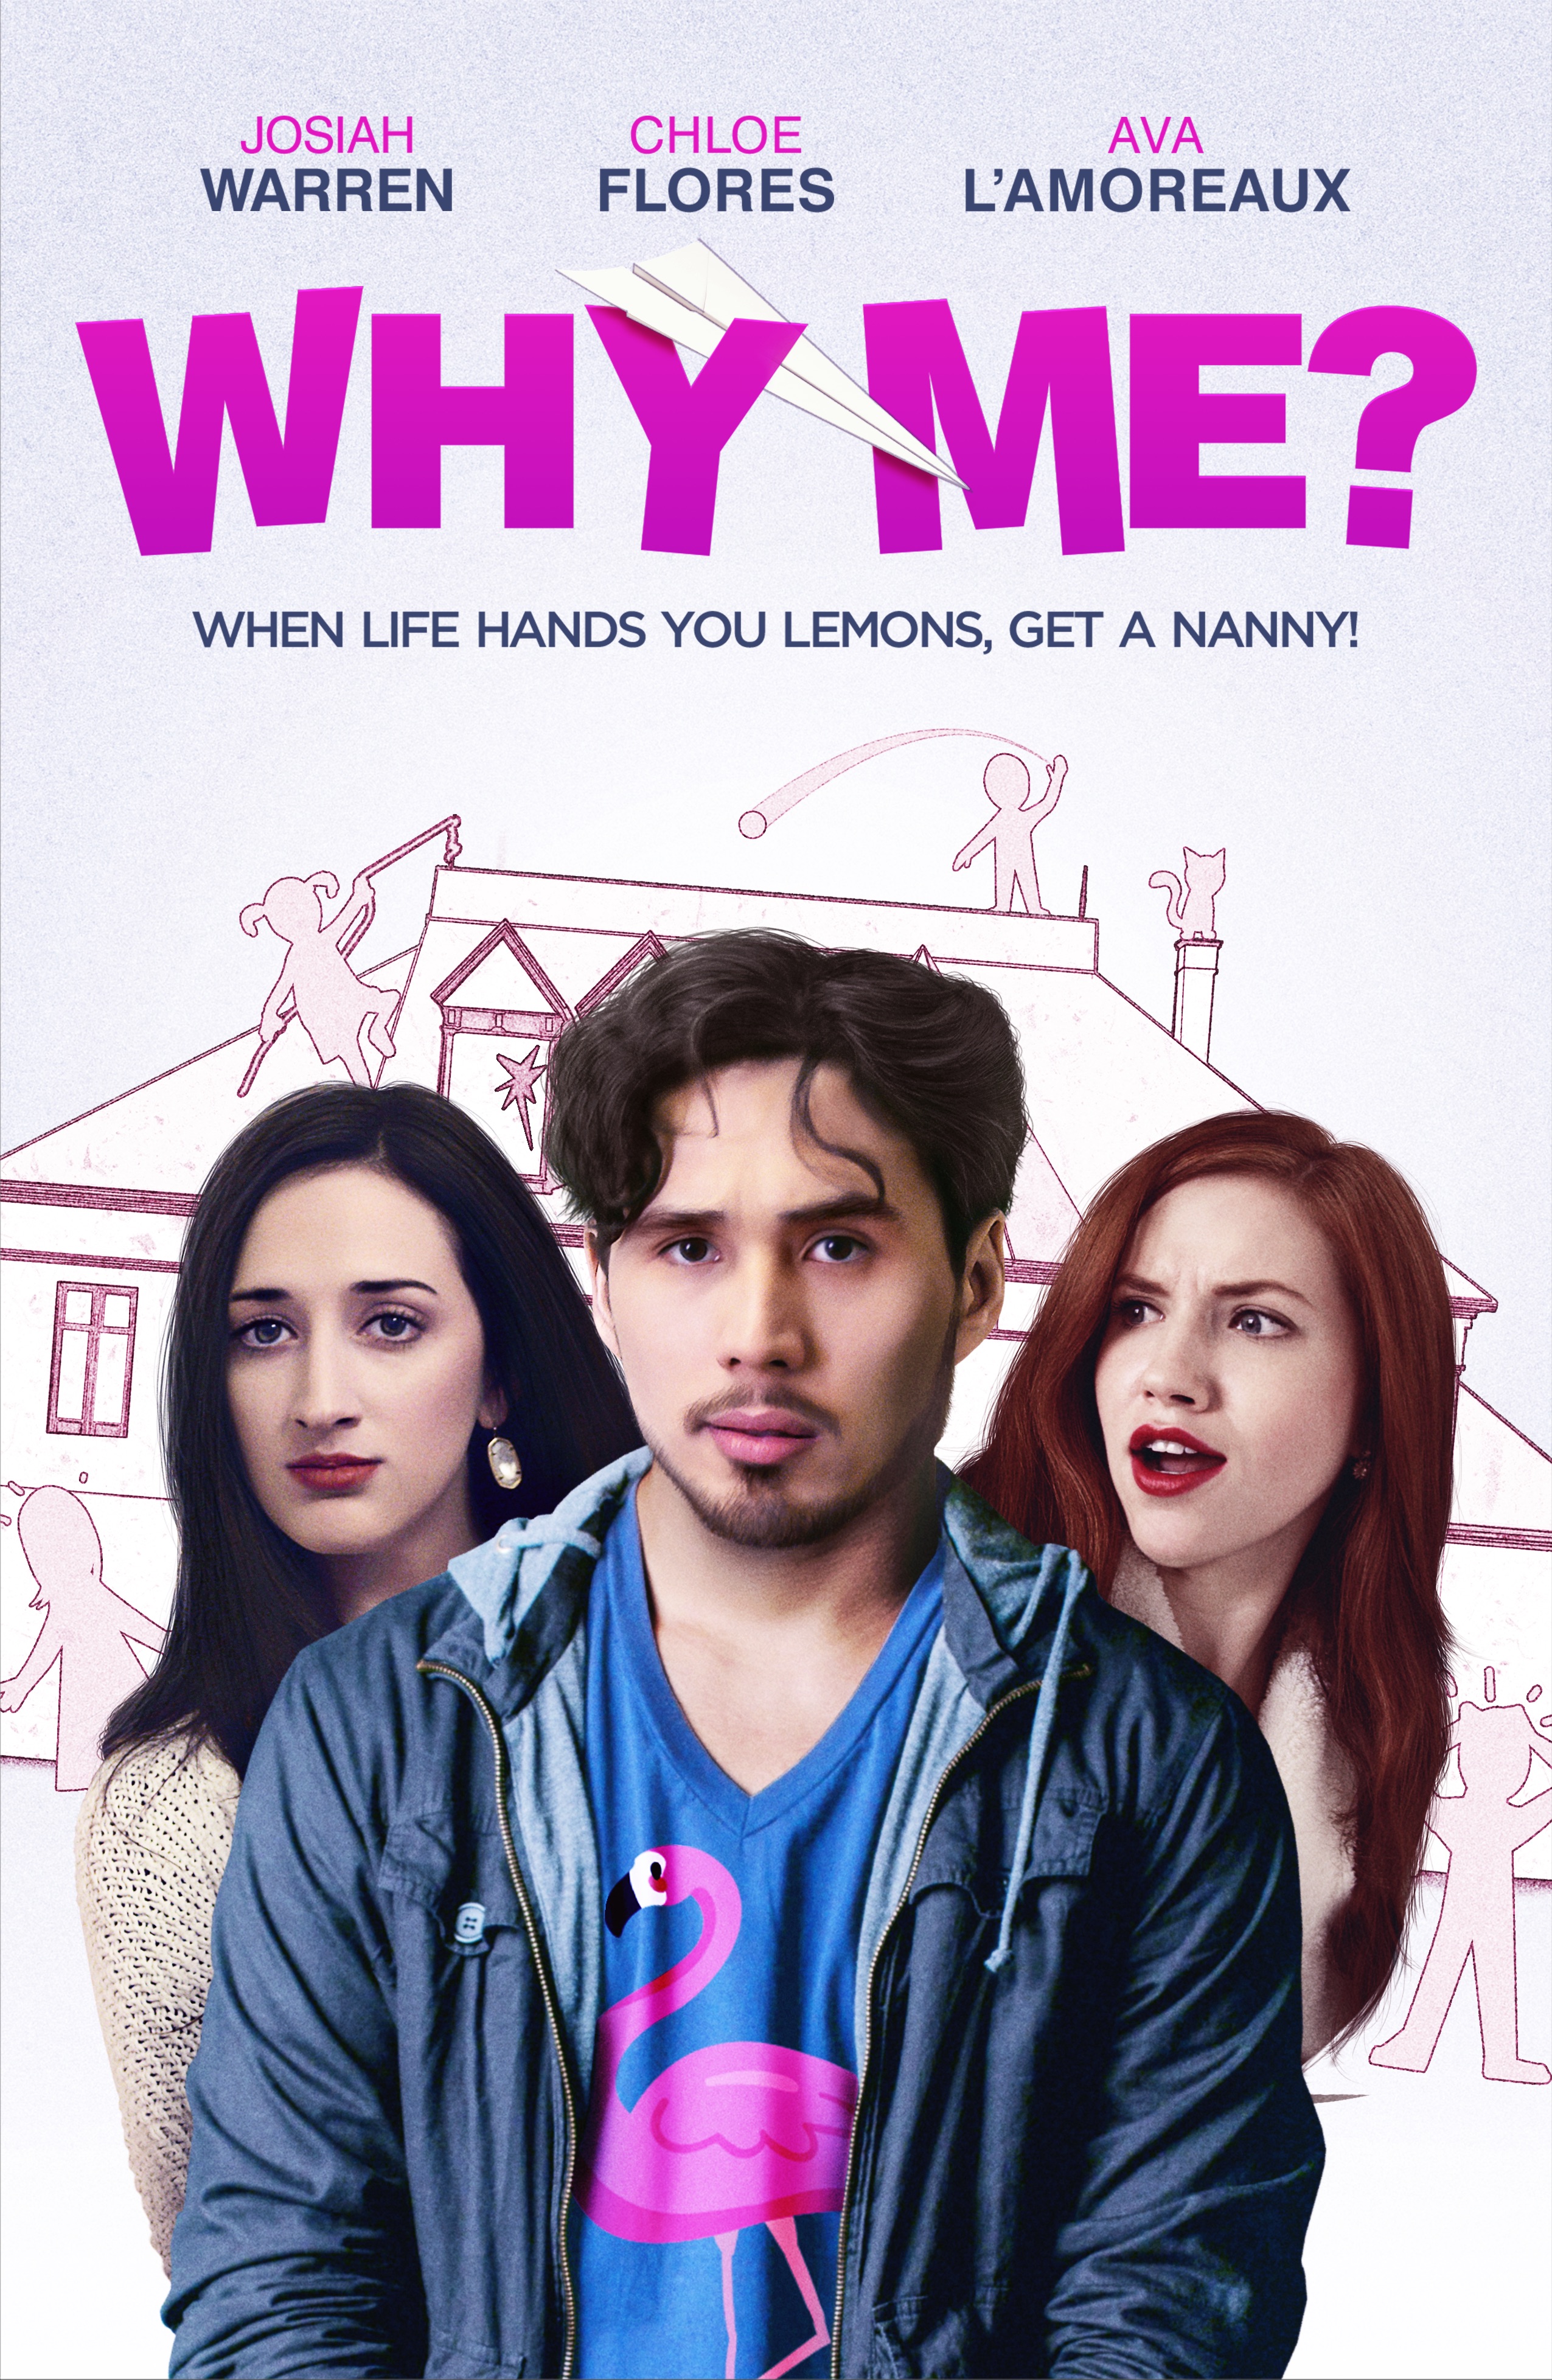 Why Me? (2020)